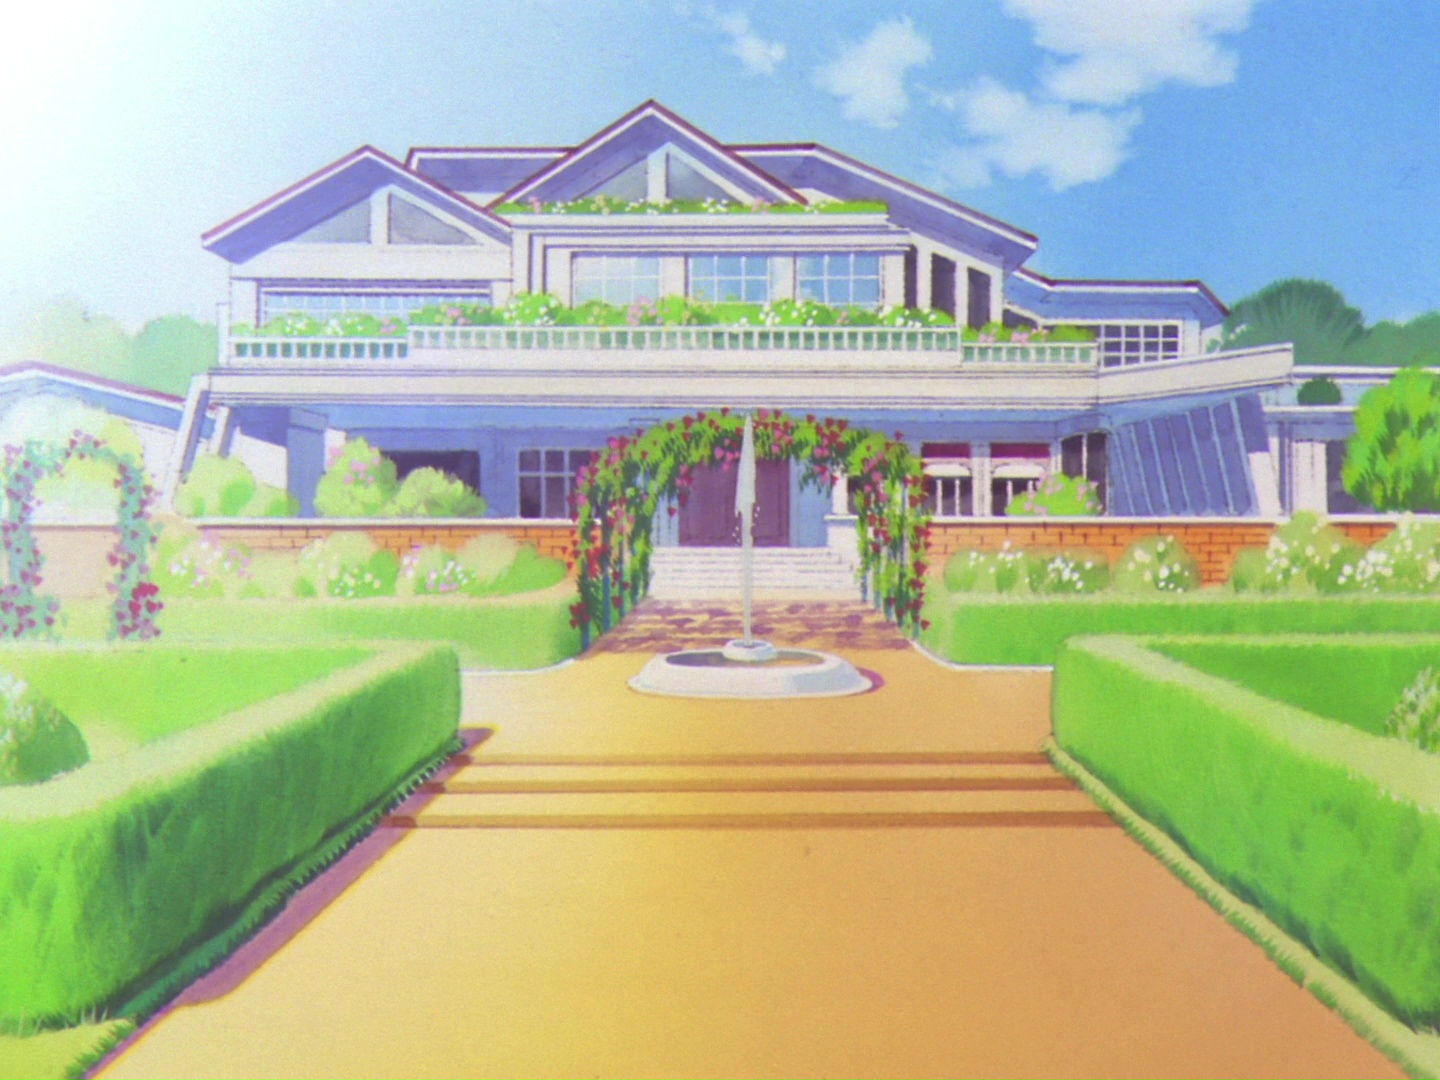 Anime House ❤ liked on Polyvore featuring anime | Anime house, Anime houses,  House tokyo